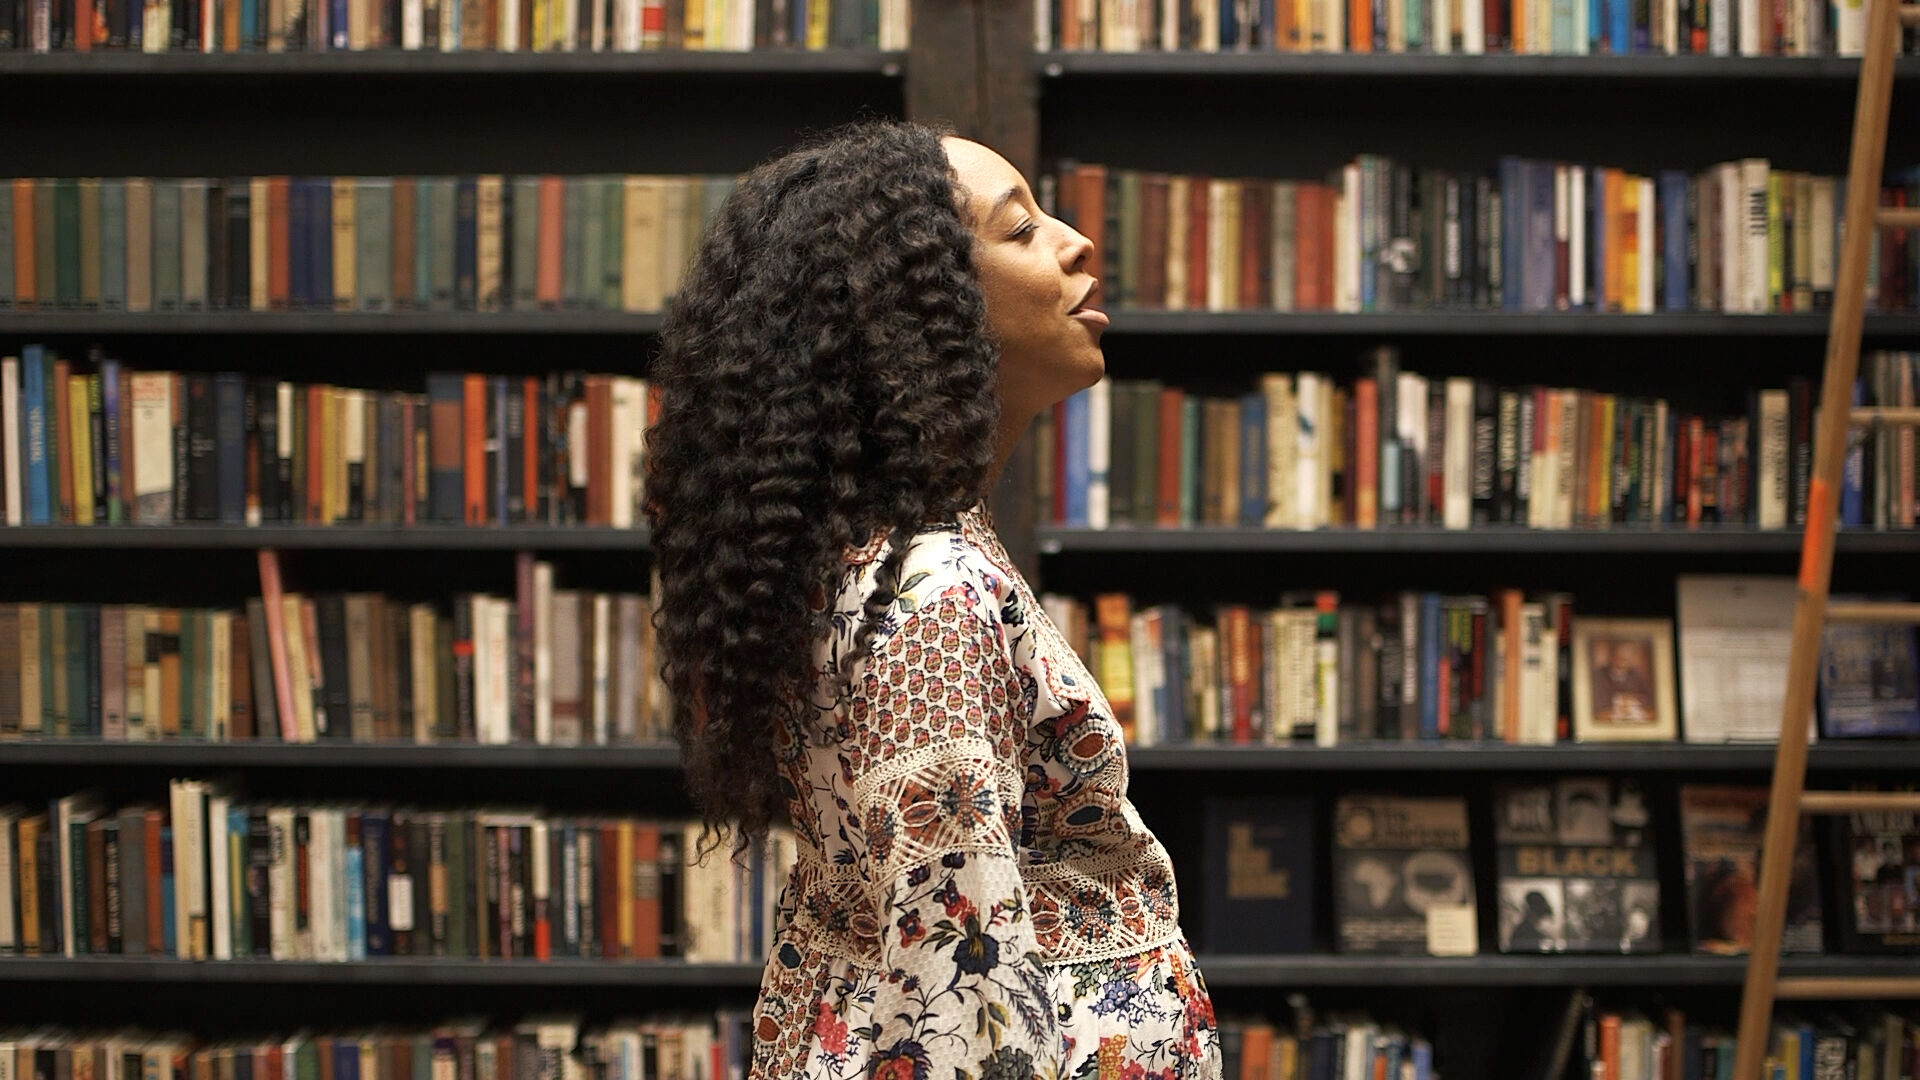 A woman in profile view standing in front of a bookshelf.